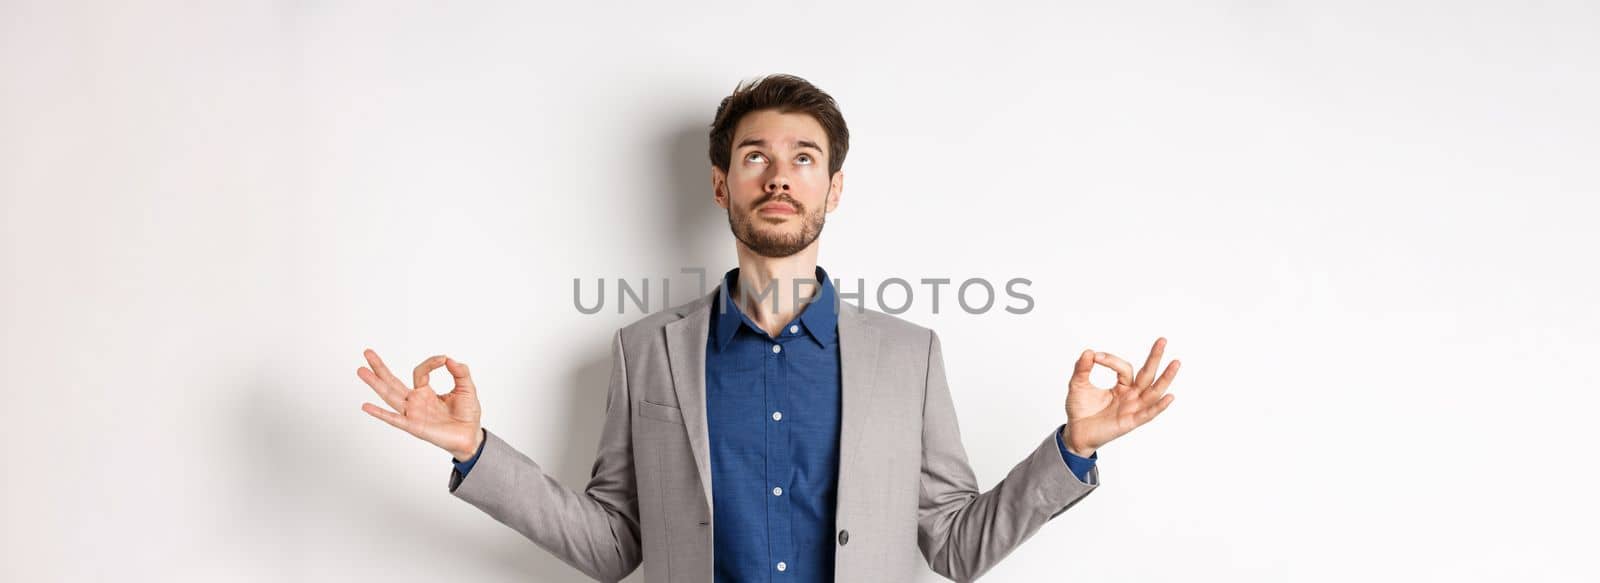 Calm ceo manager in suit relaxing with meditation, looking up and holding hands in zen mudra sign, standing on white background.